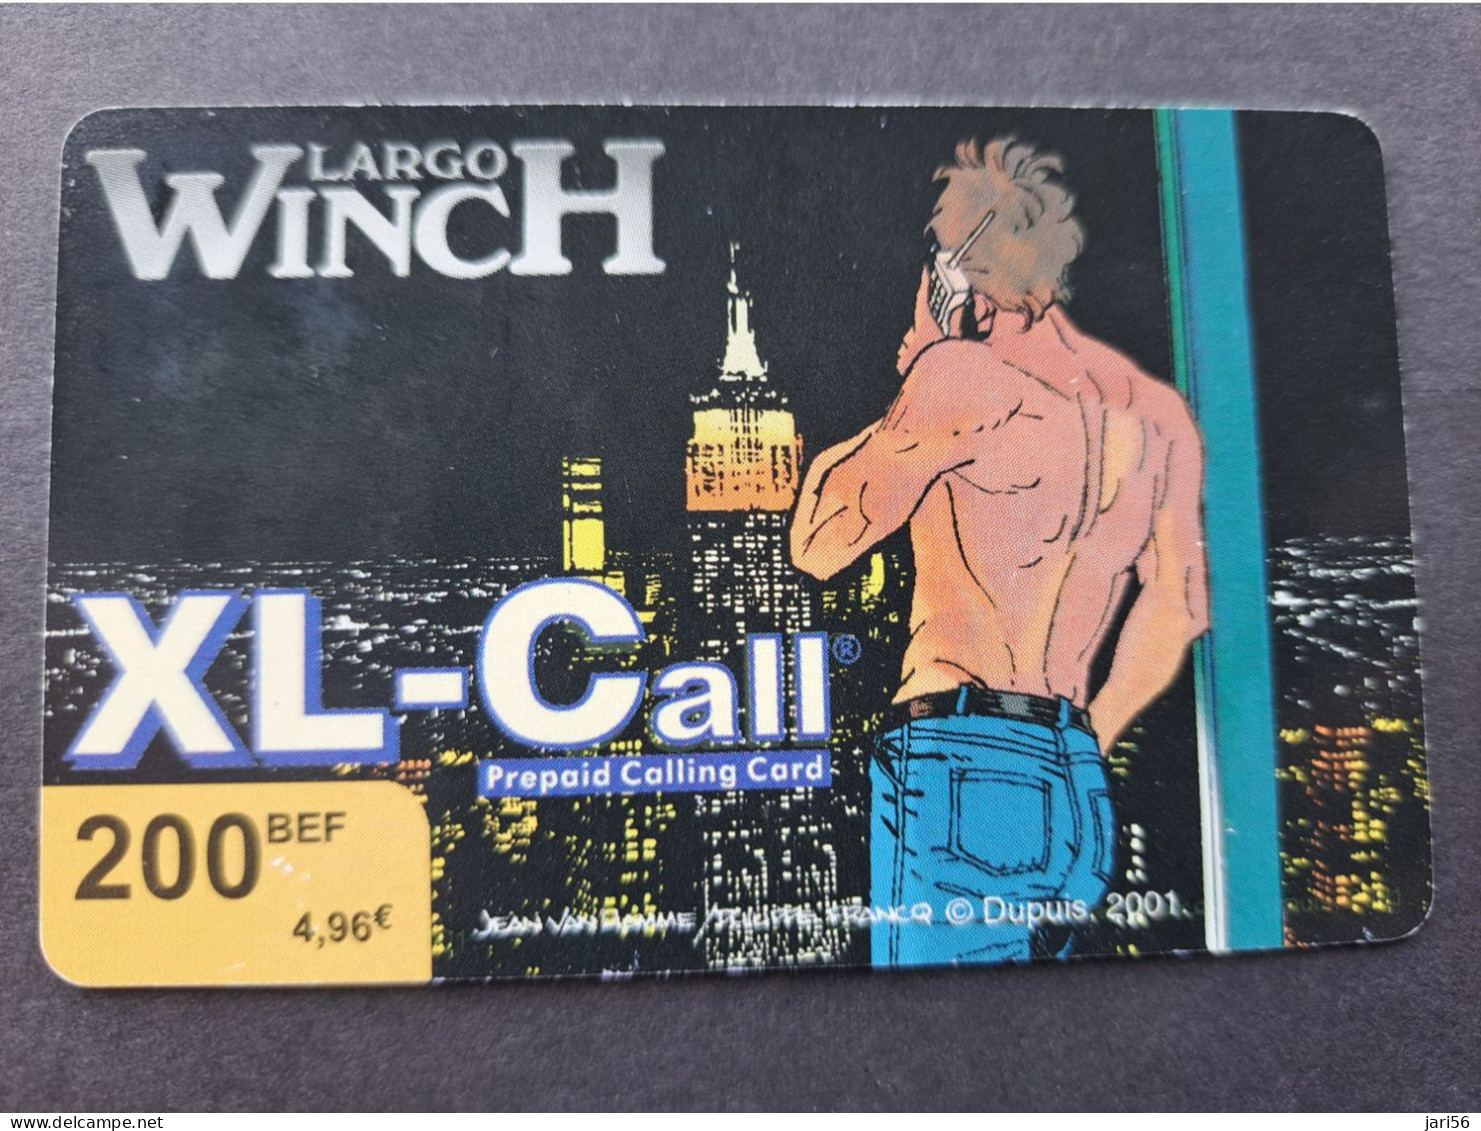 BELGIUM / XL-CALL € 4,96  /  LARGO- WINCH PREPAID /CITY BY NIGHT/    USED  CARD  ** 16617 ** - Ohne Chip